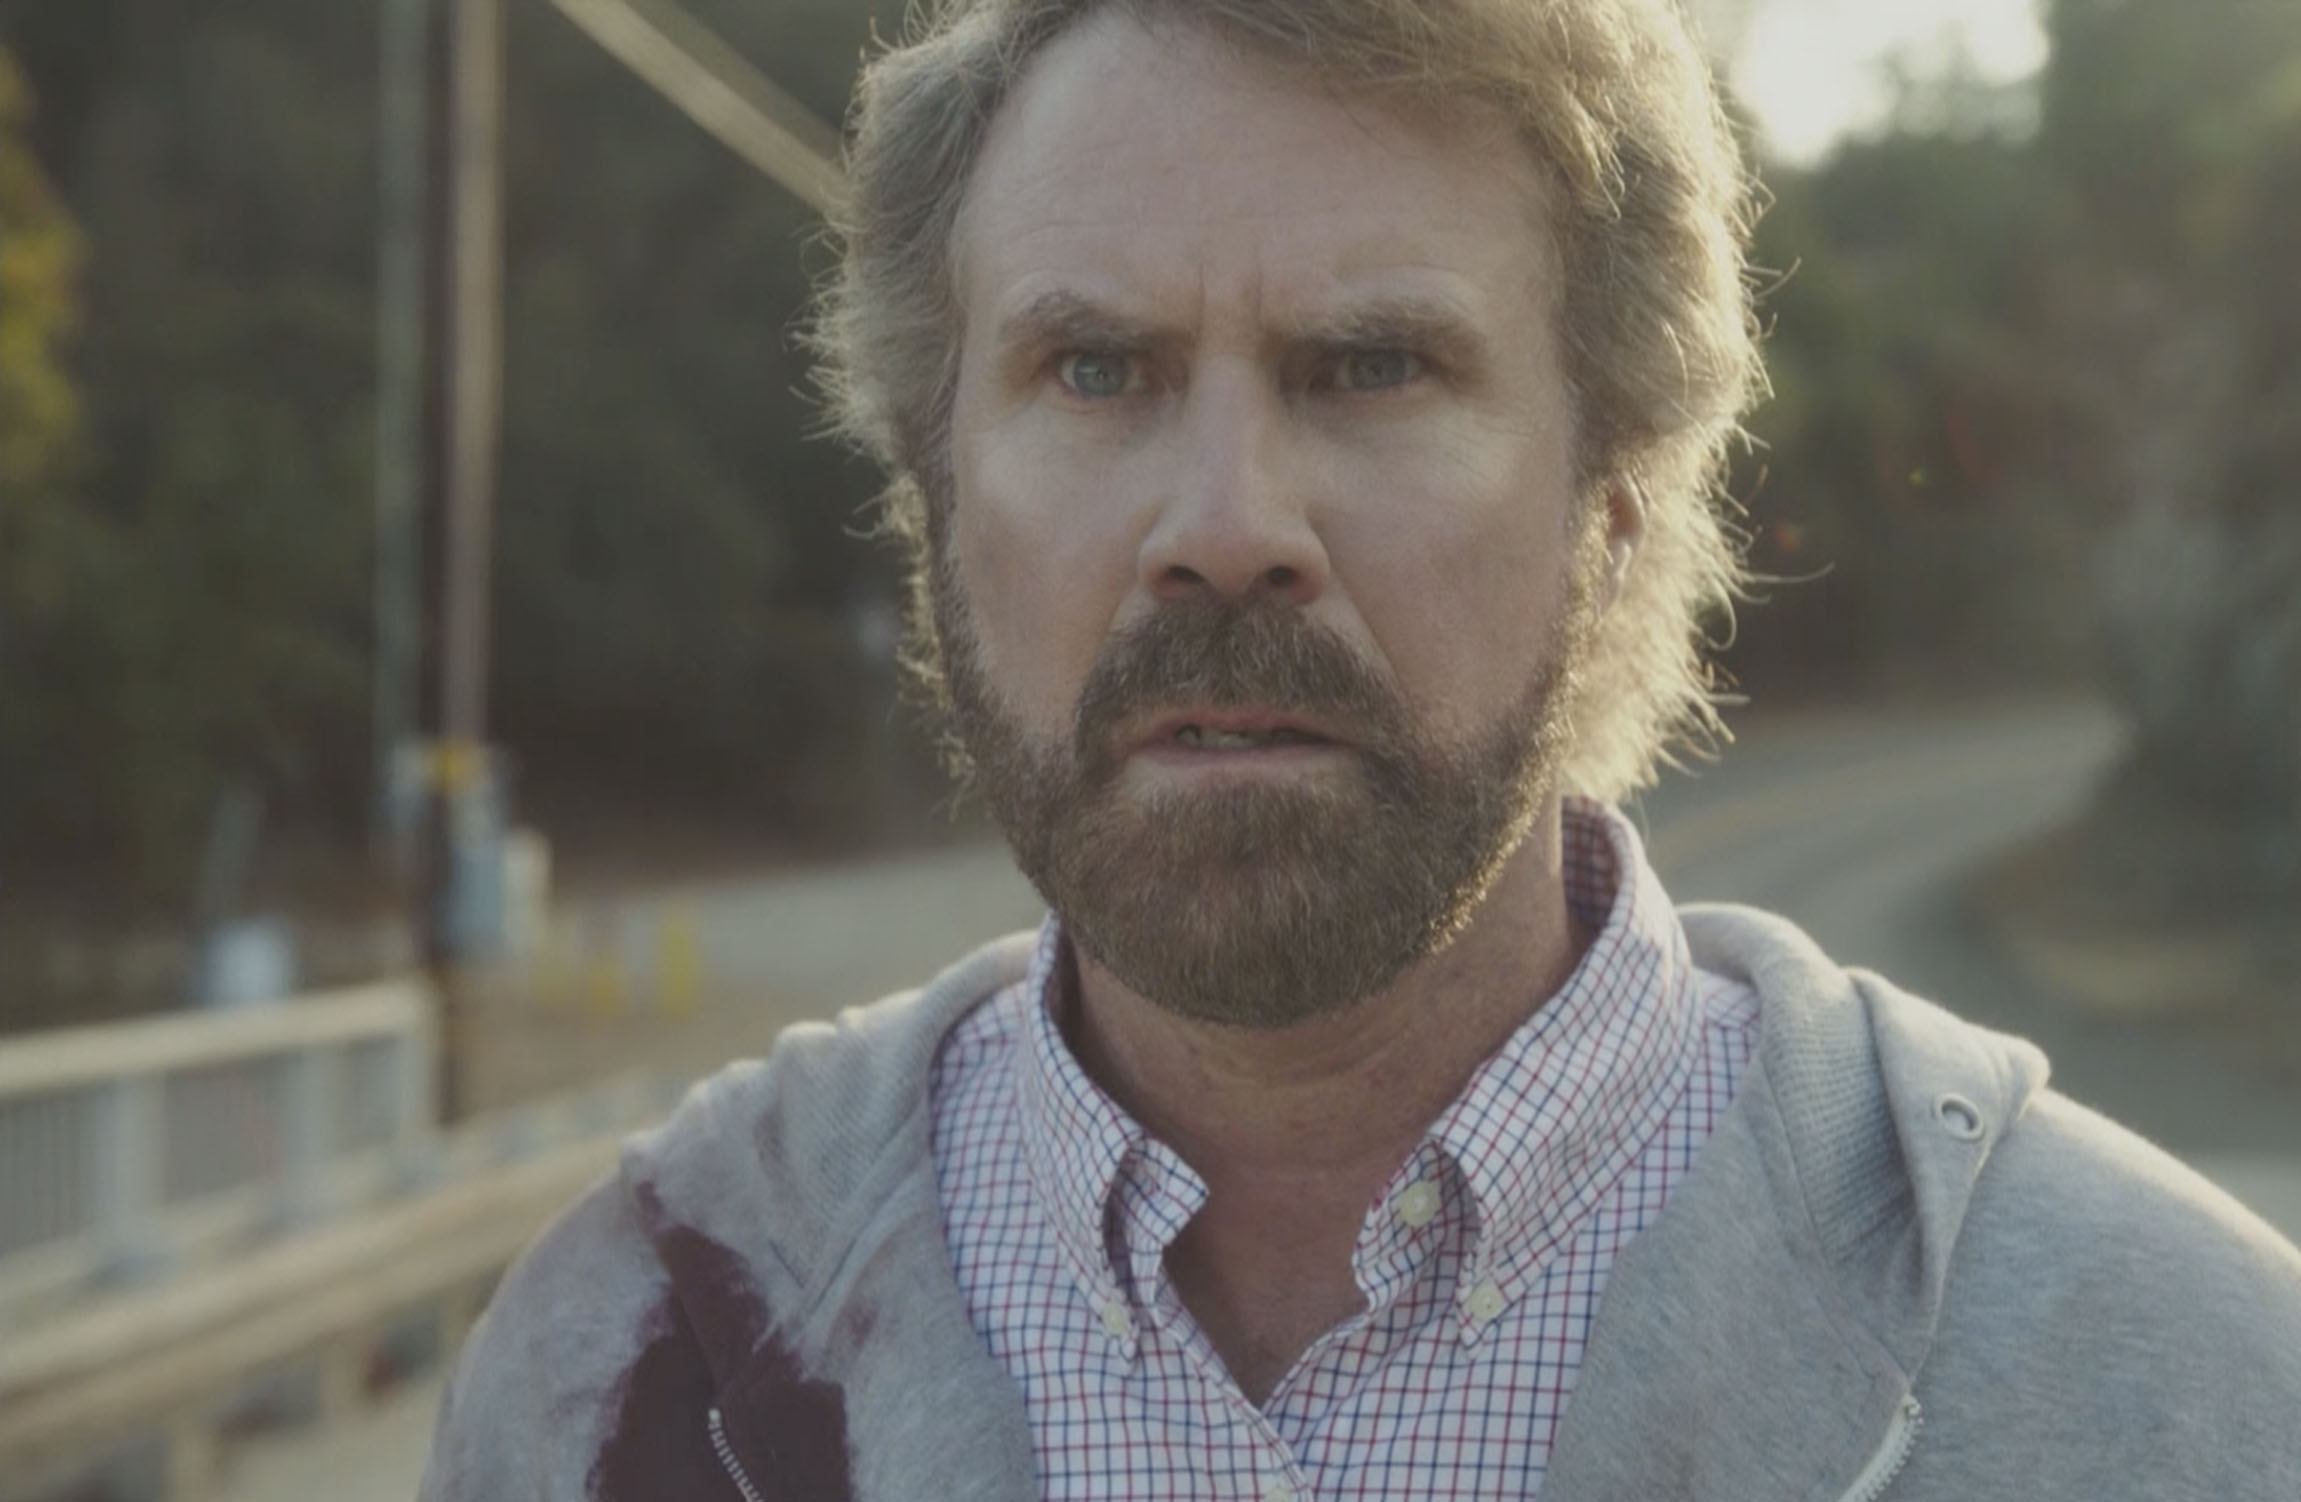 <p>Will Ferrell starred alongside Kristen Wiig in the 2015 thriller "A Deadly Adoption." The film, which was inspired by a true story, focused on a successful couple who takes care of a pregnant woman (Jessica Lowndes) with the hope of adopting her child. Will played Robert Benson, a successful author, financial guru and husband to Sarah Benson (Kristen). "A Deadly Adoption" premiered on the Lifetime television network and scored just a 14% fresh rating on Rotten Tomatoes. </p>